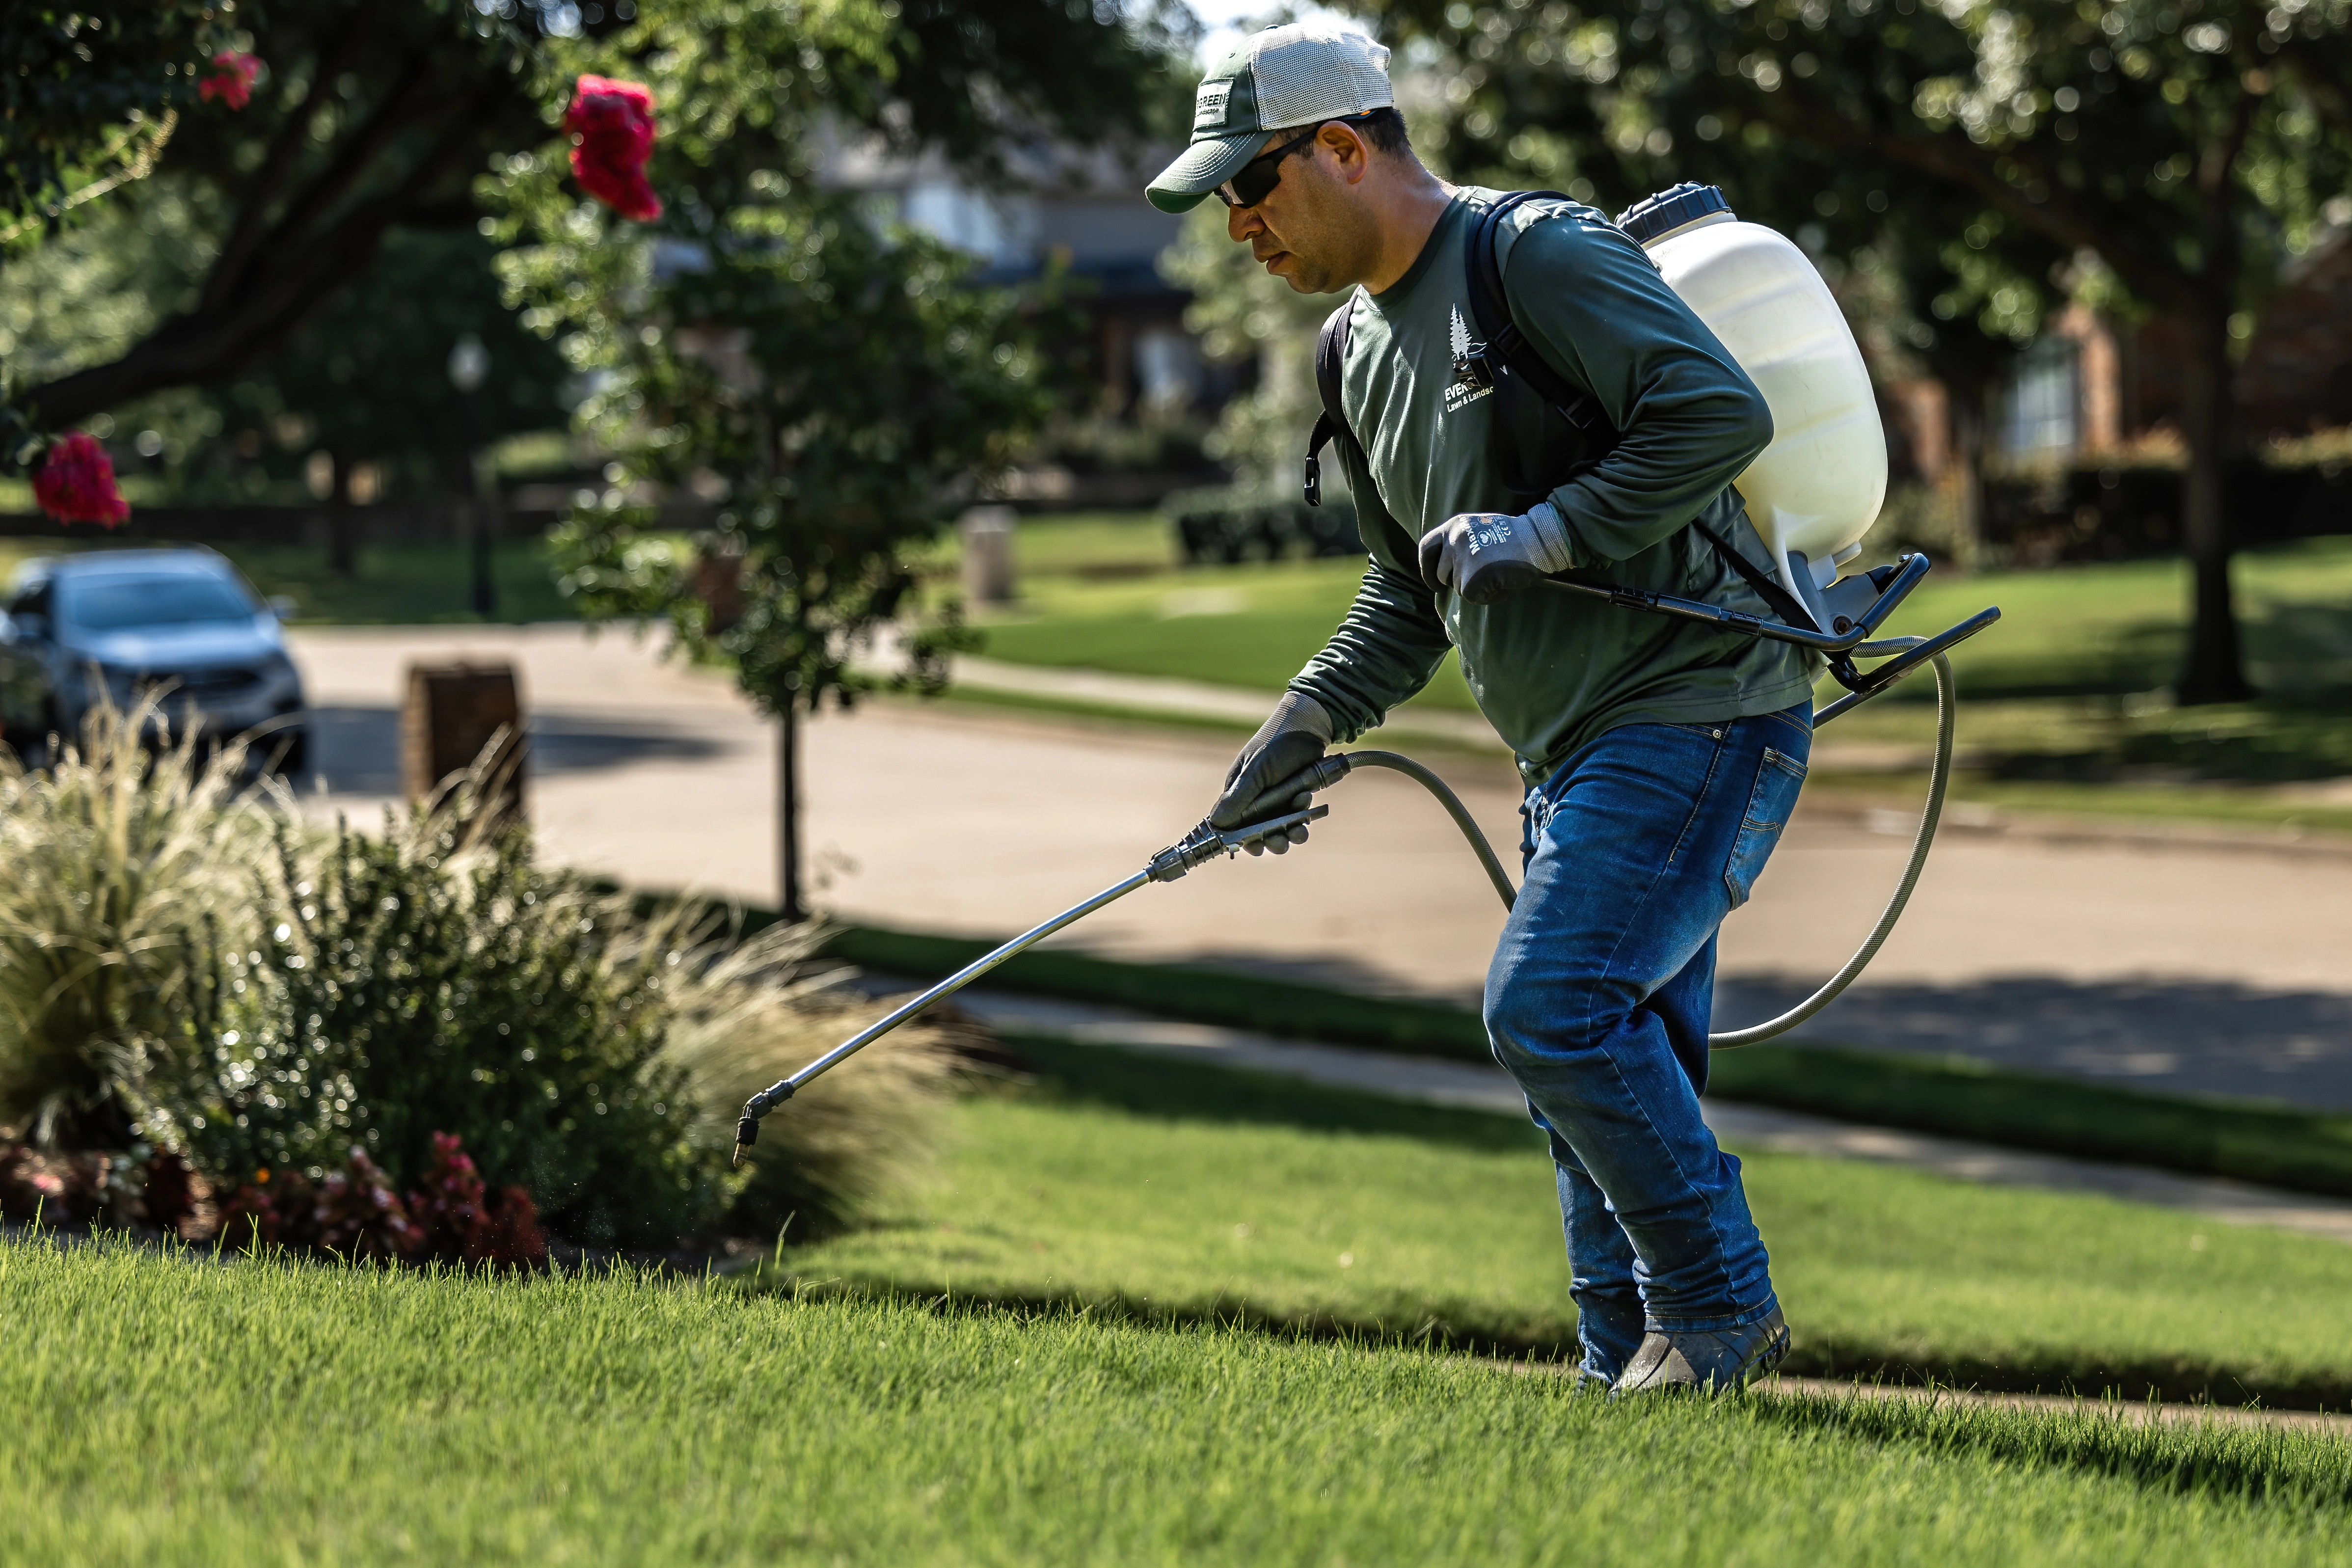 Keeping Your Lawn Looking Its Best: The Advantages of Pre-Emergent Weed Control